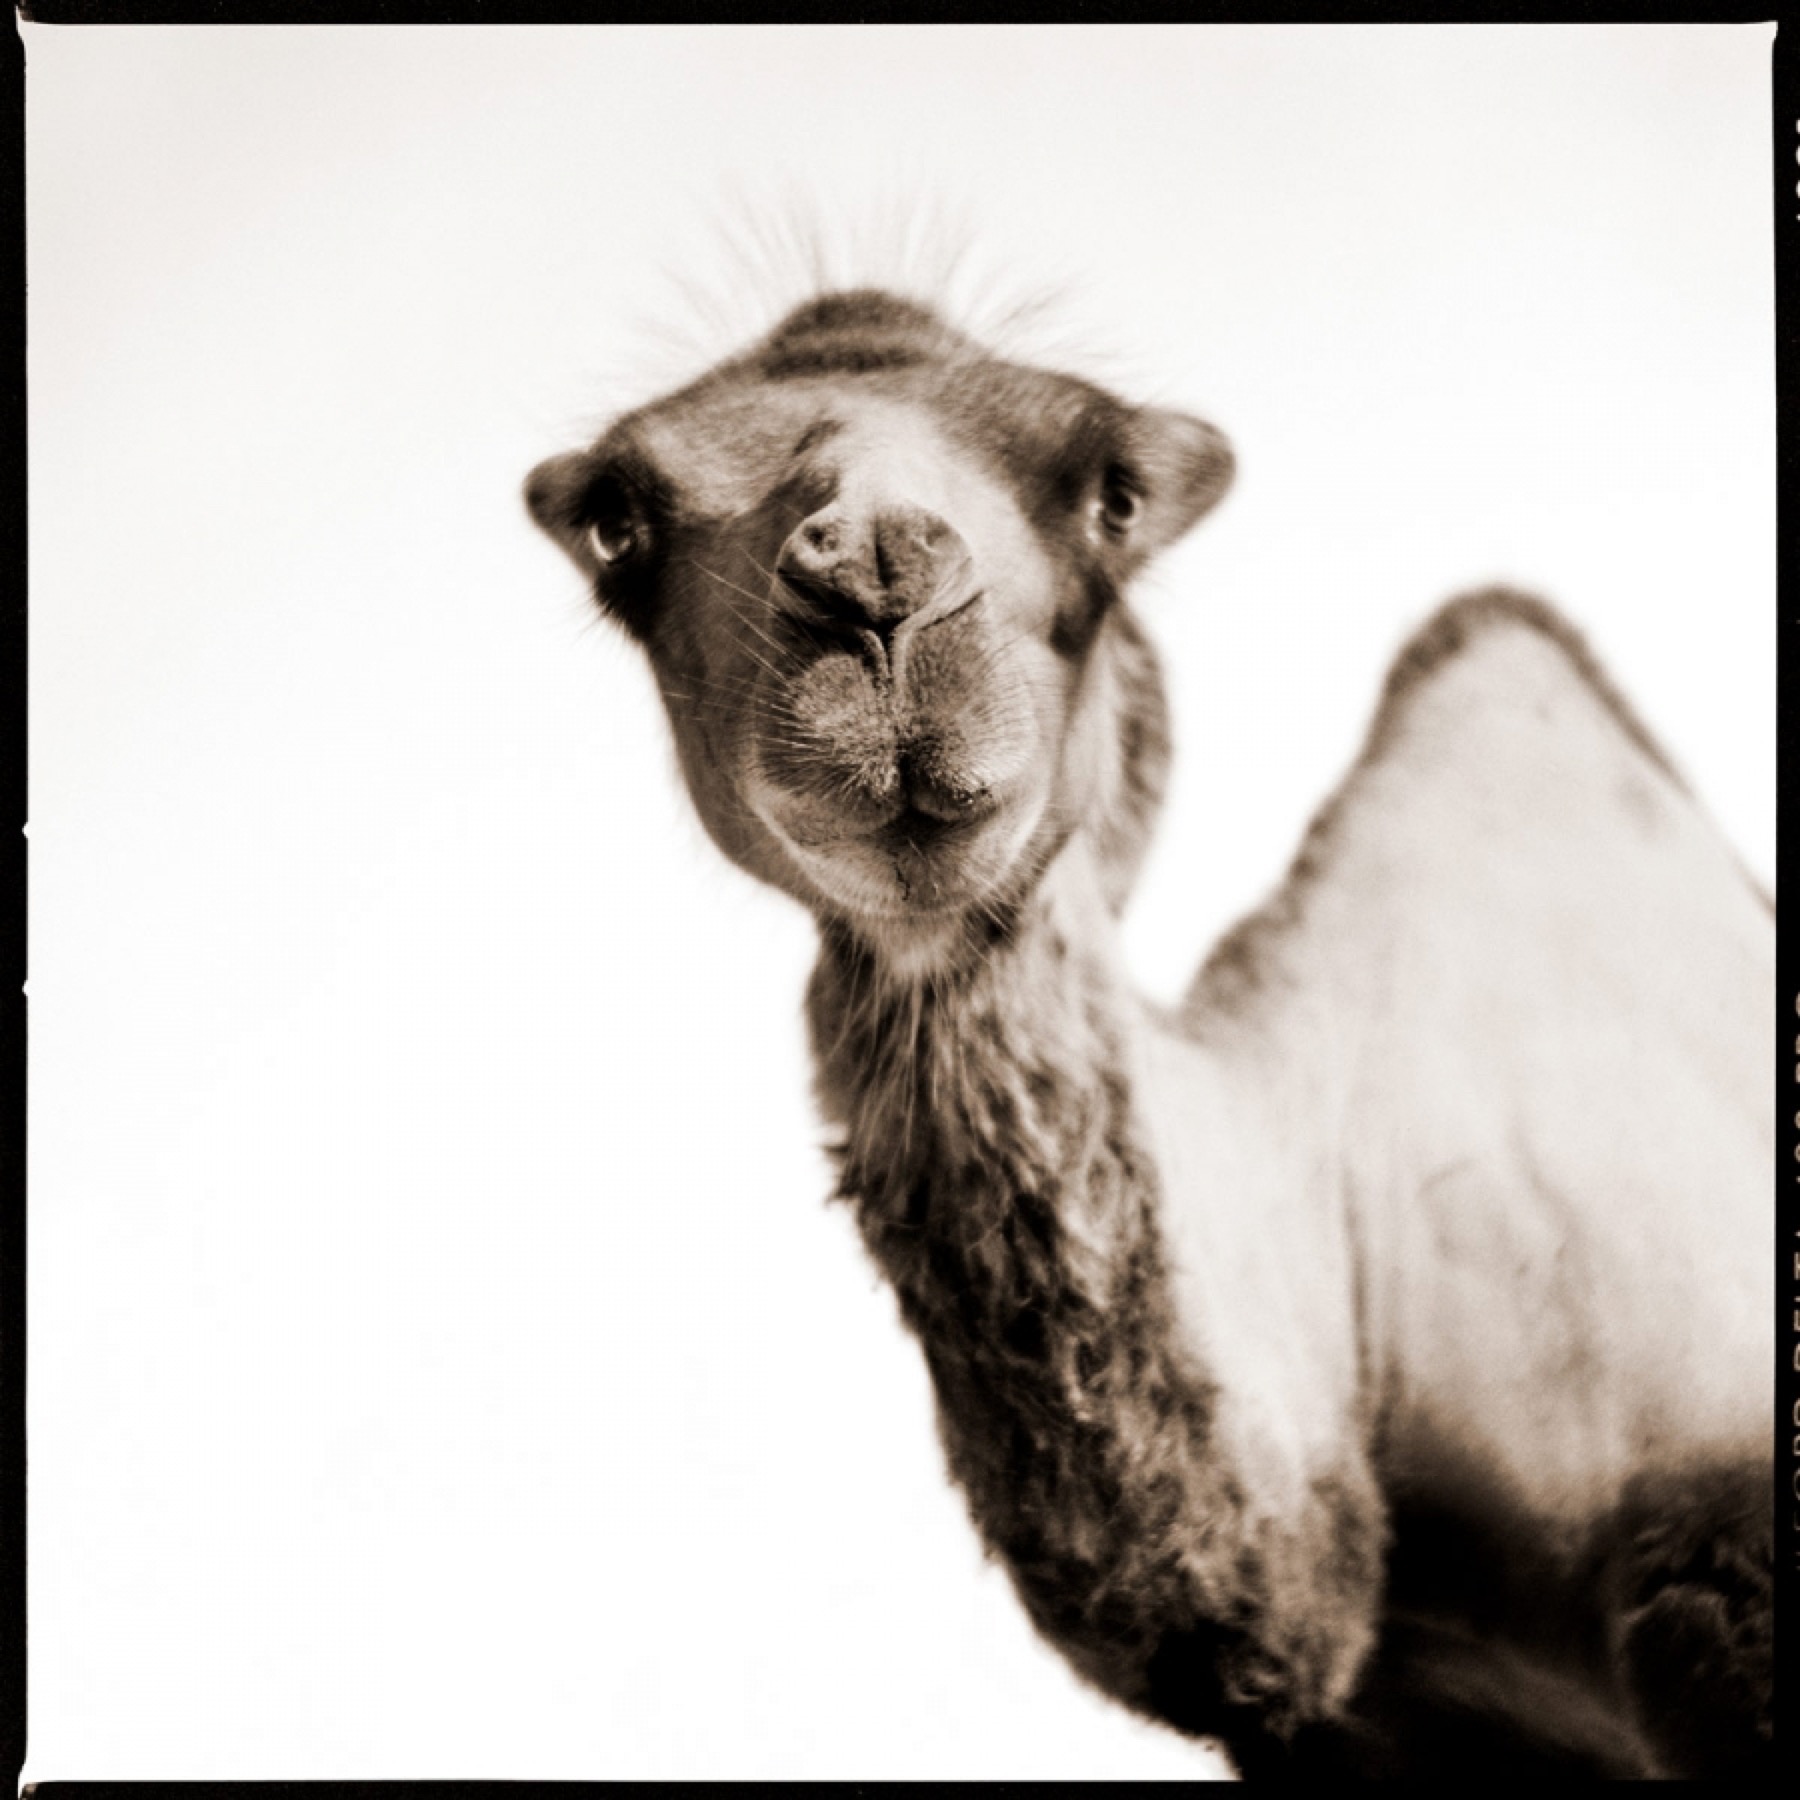 Truth or Tail: A camel's hump Cleveland Zoological Society